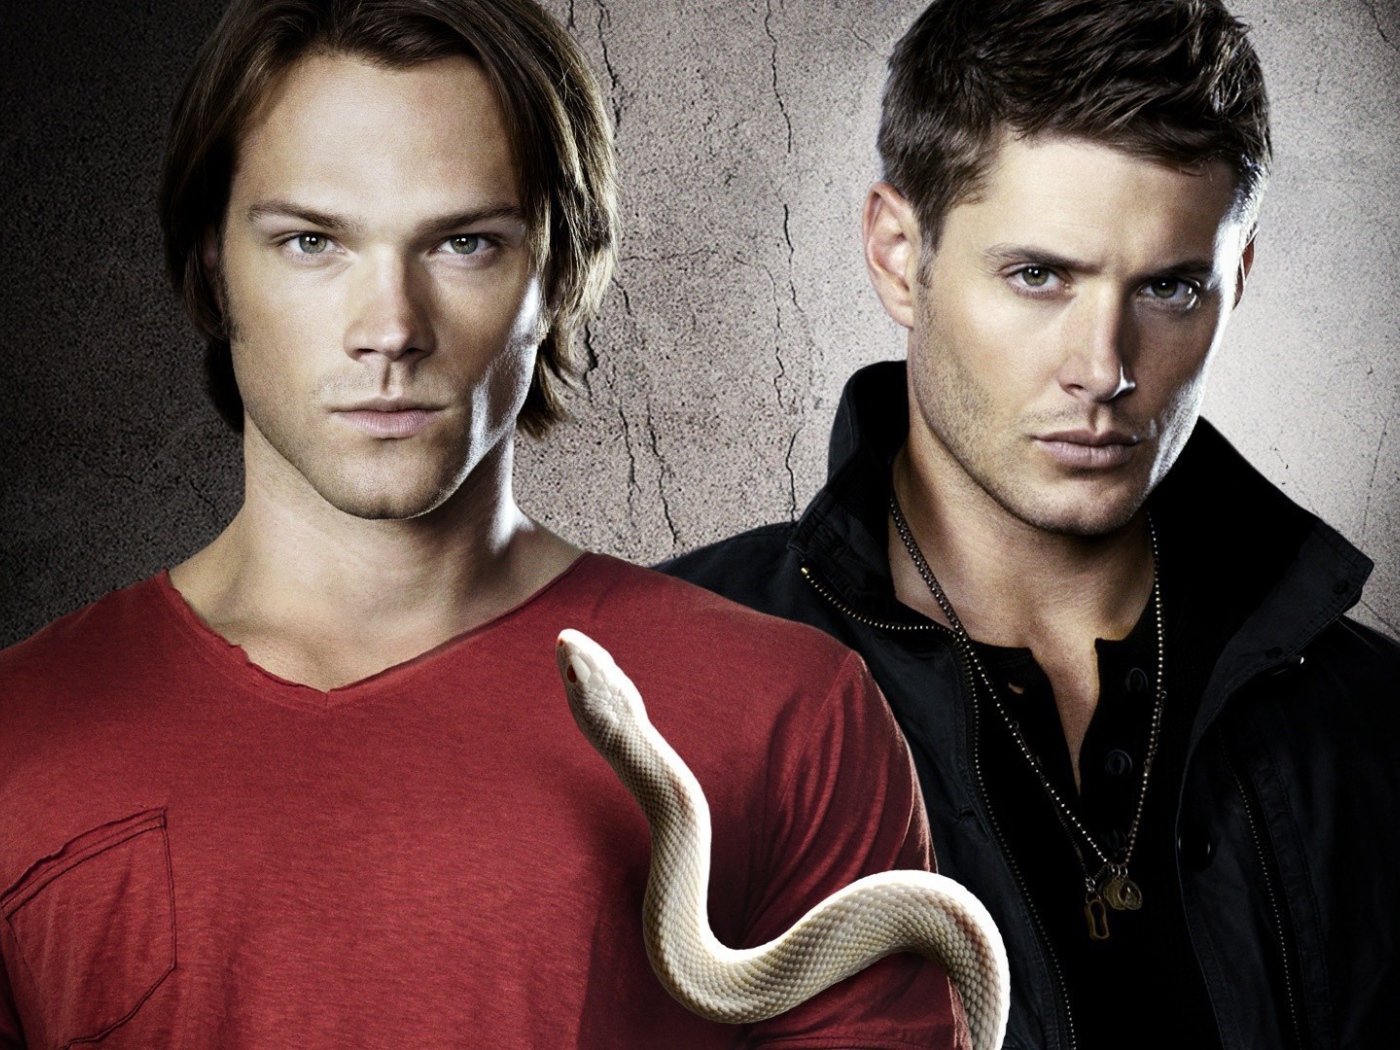 Sam and Dean from the TV series Supernatural